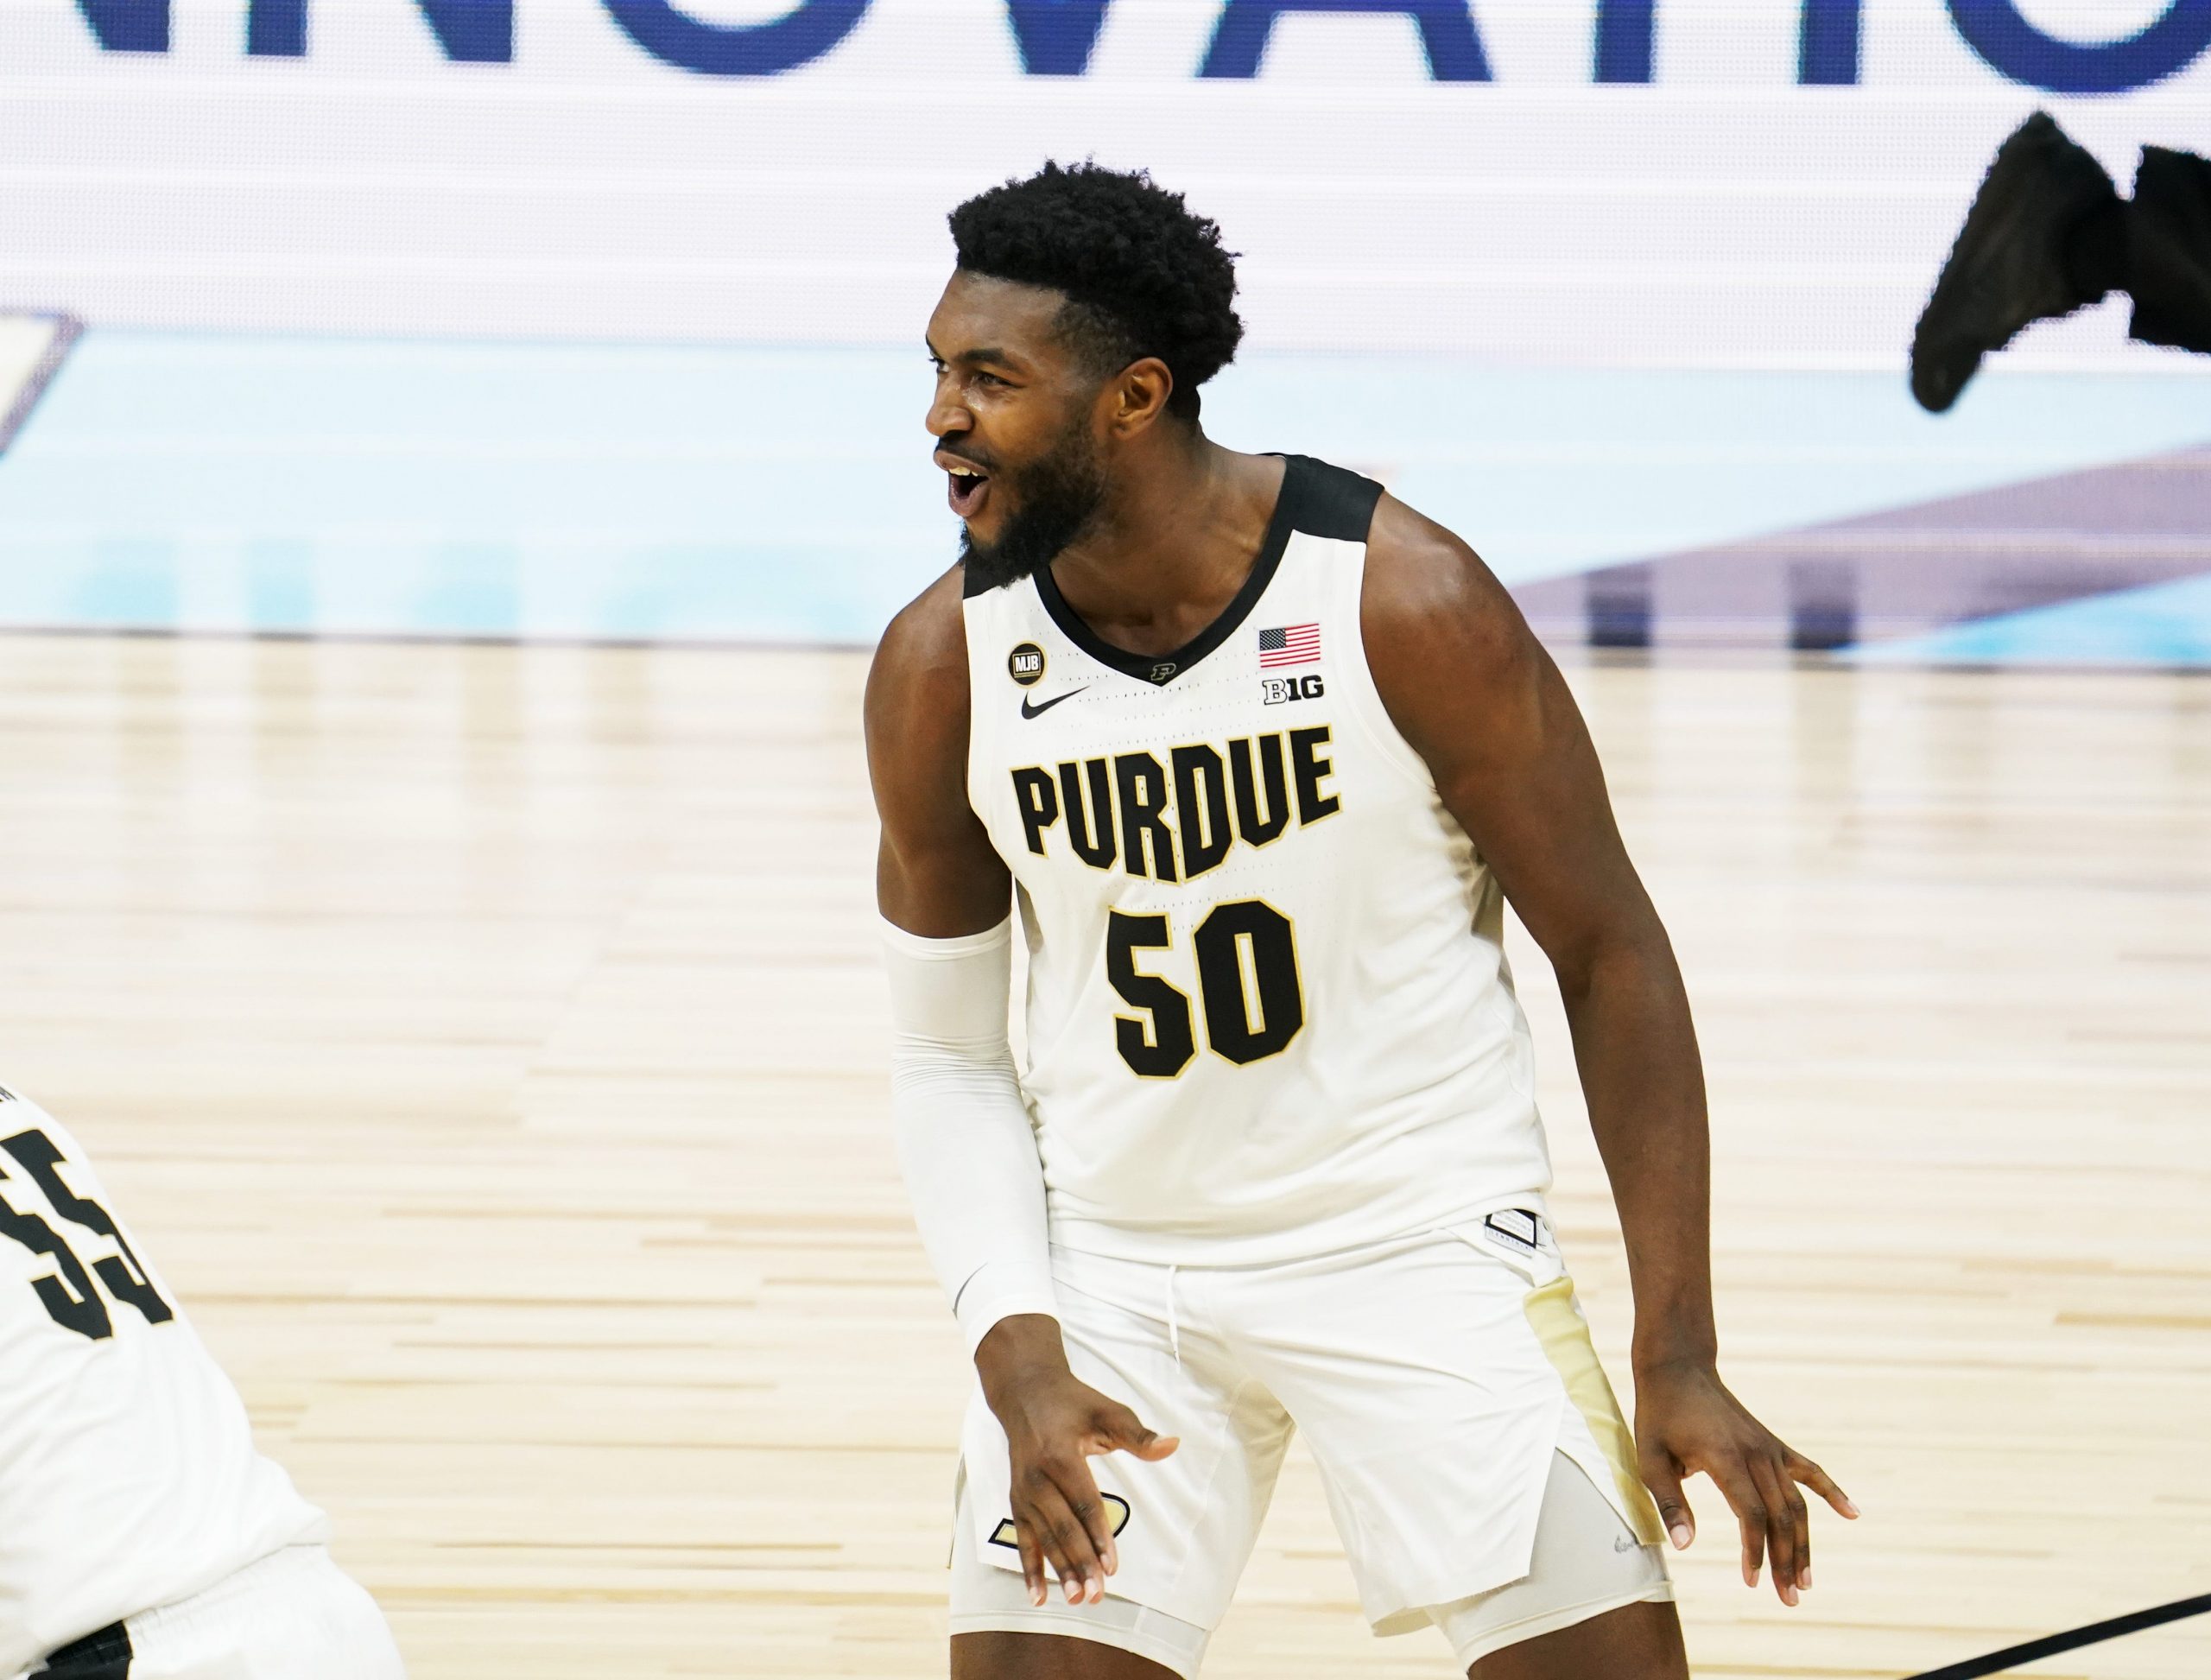 Purdue Boilermakers forward Trevion Williams (50) yells in excitement during the Big Ten tournament, Friday, March 12, 2021 at Lucas Oil Stadium